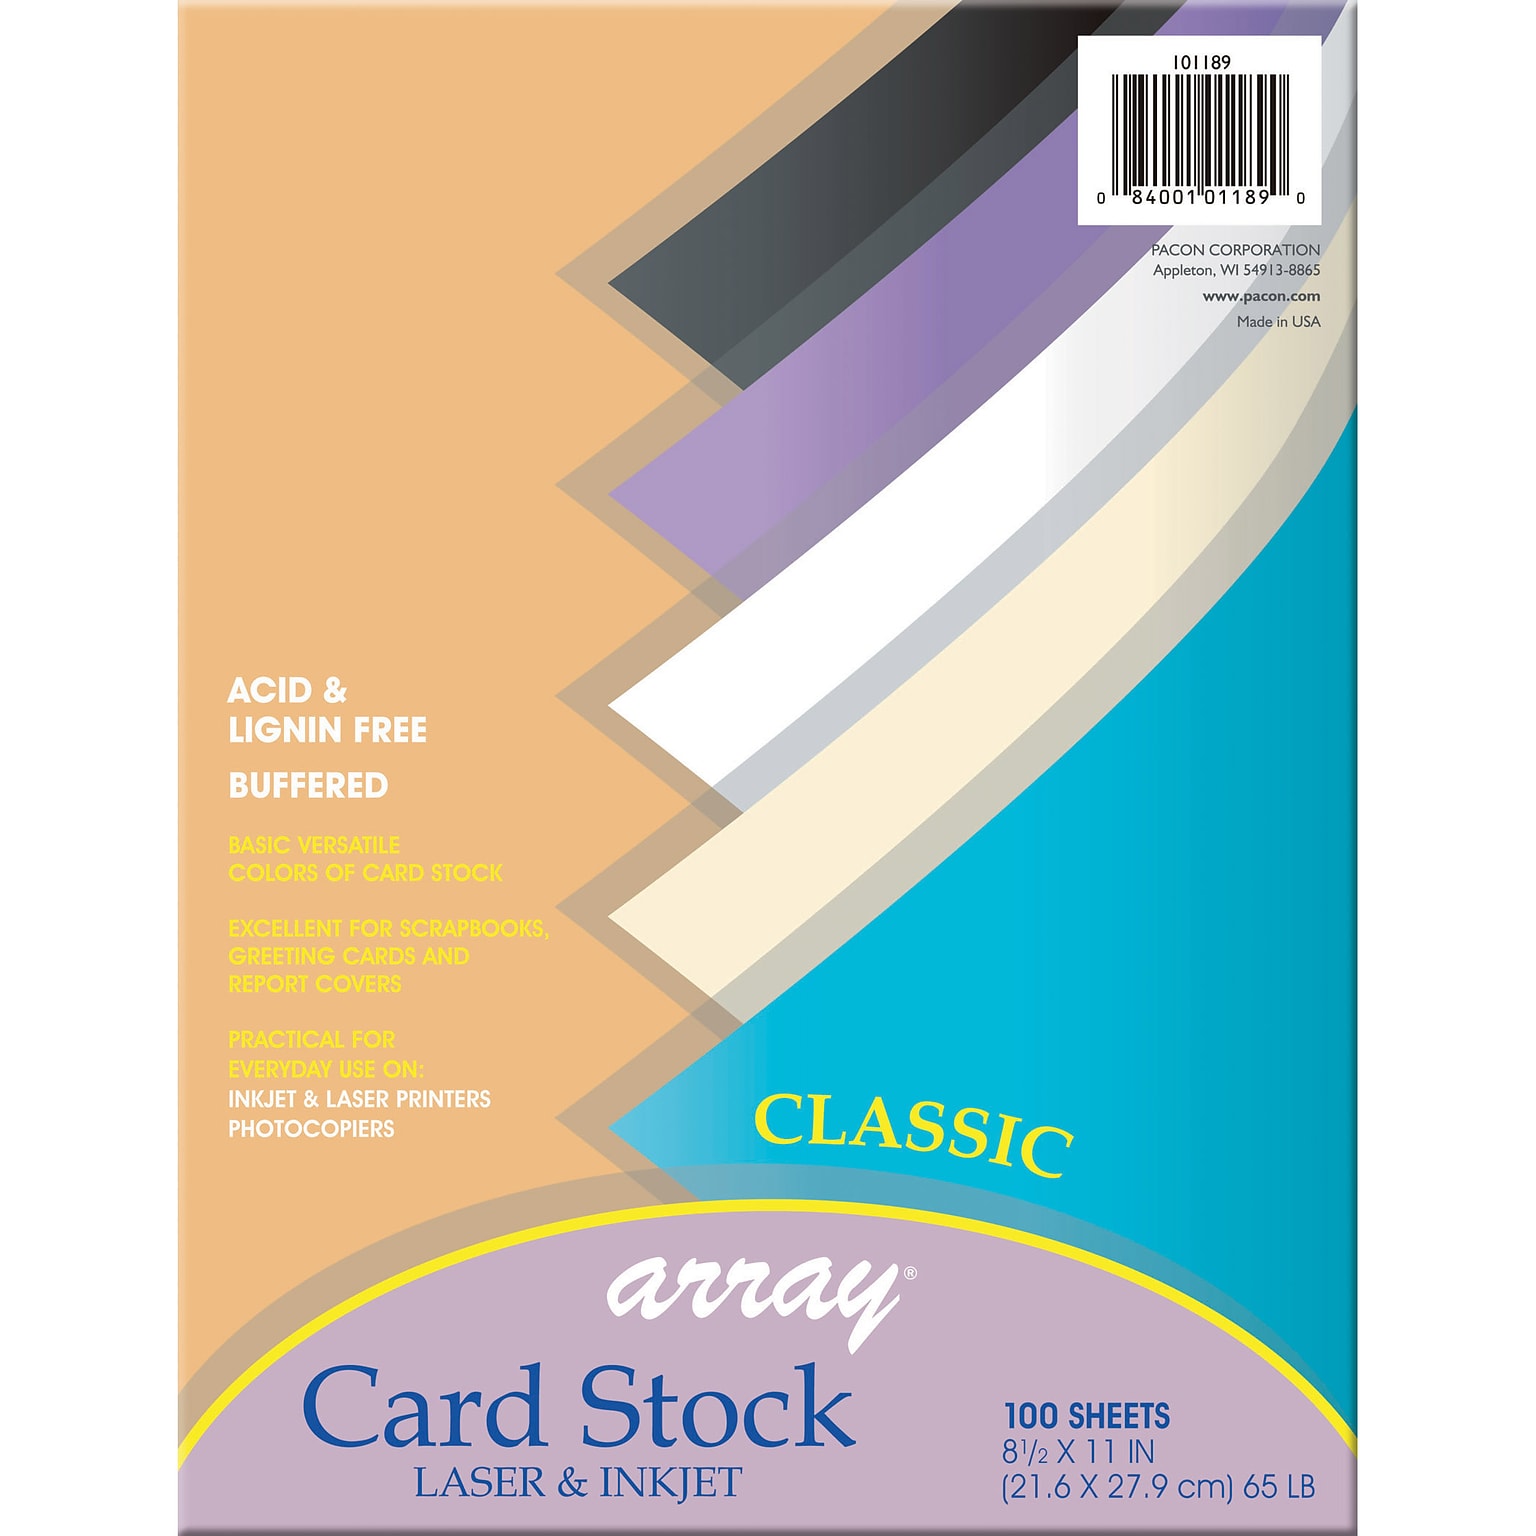 Pacon Array® Card Stock, 65 lbs, 8-1/2x11, Classic Colors, Assorted, 100 Sheets/Pack, 2 pks/Bundle (PAC101189)